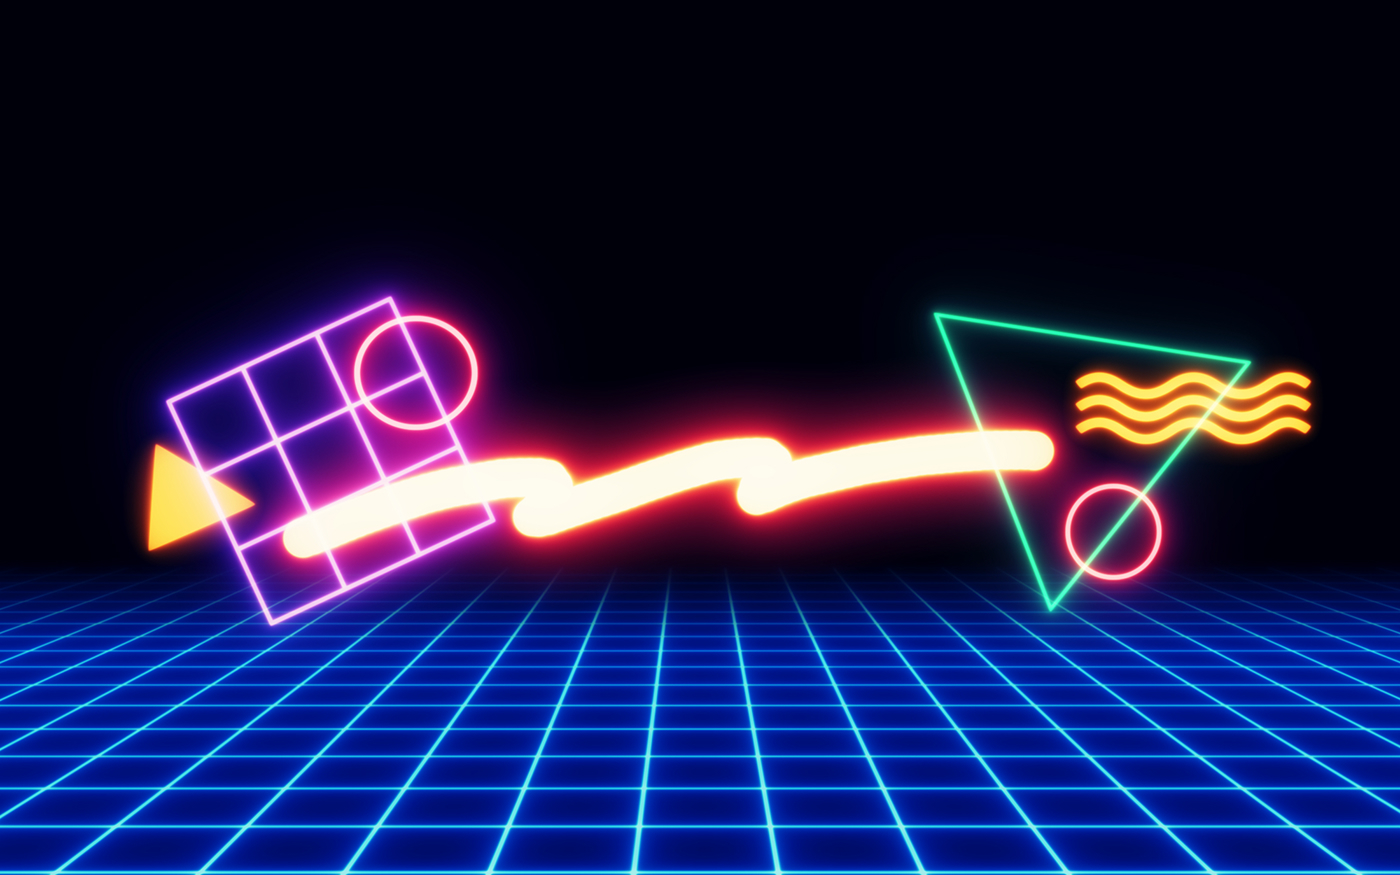 '80s Neon Shapes/Wallpapers on Behance